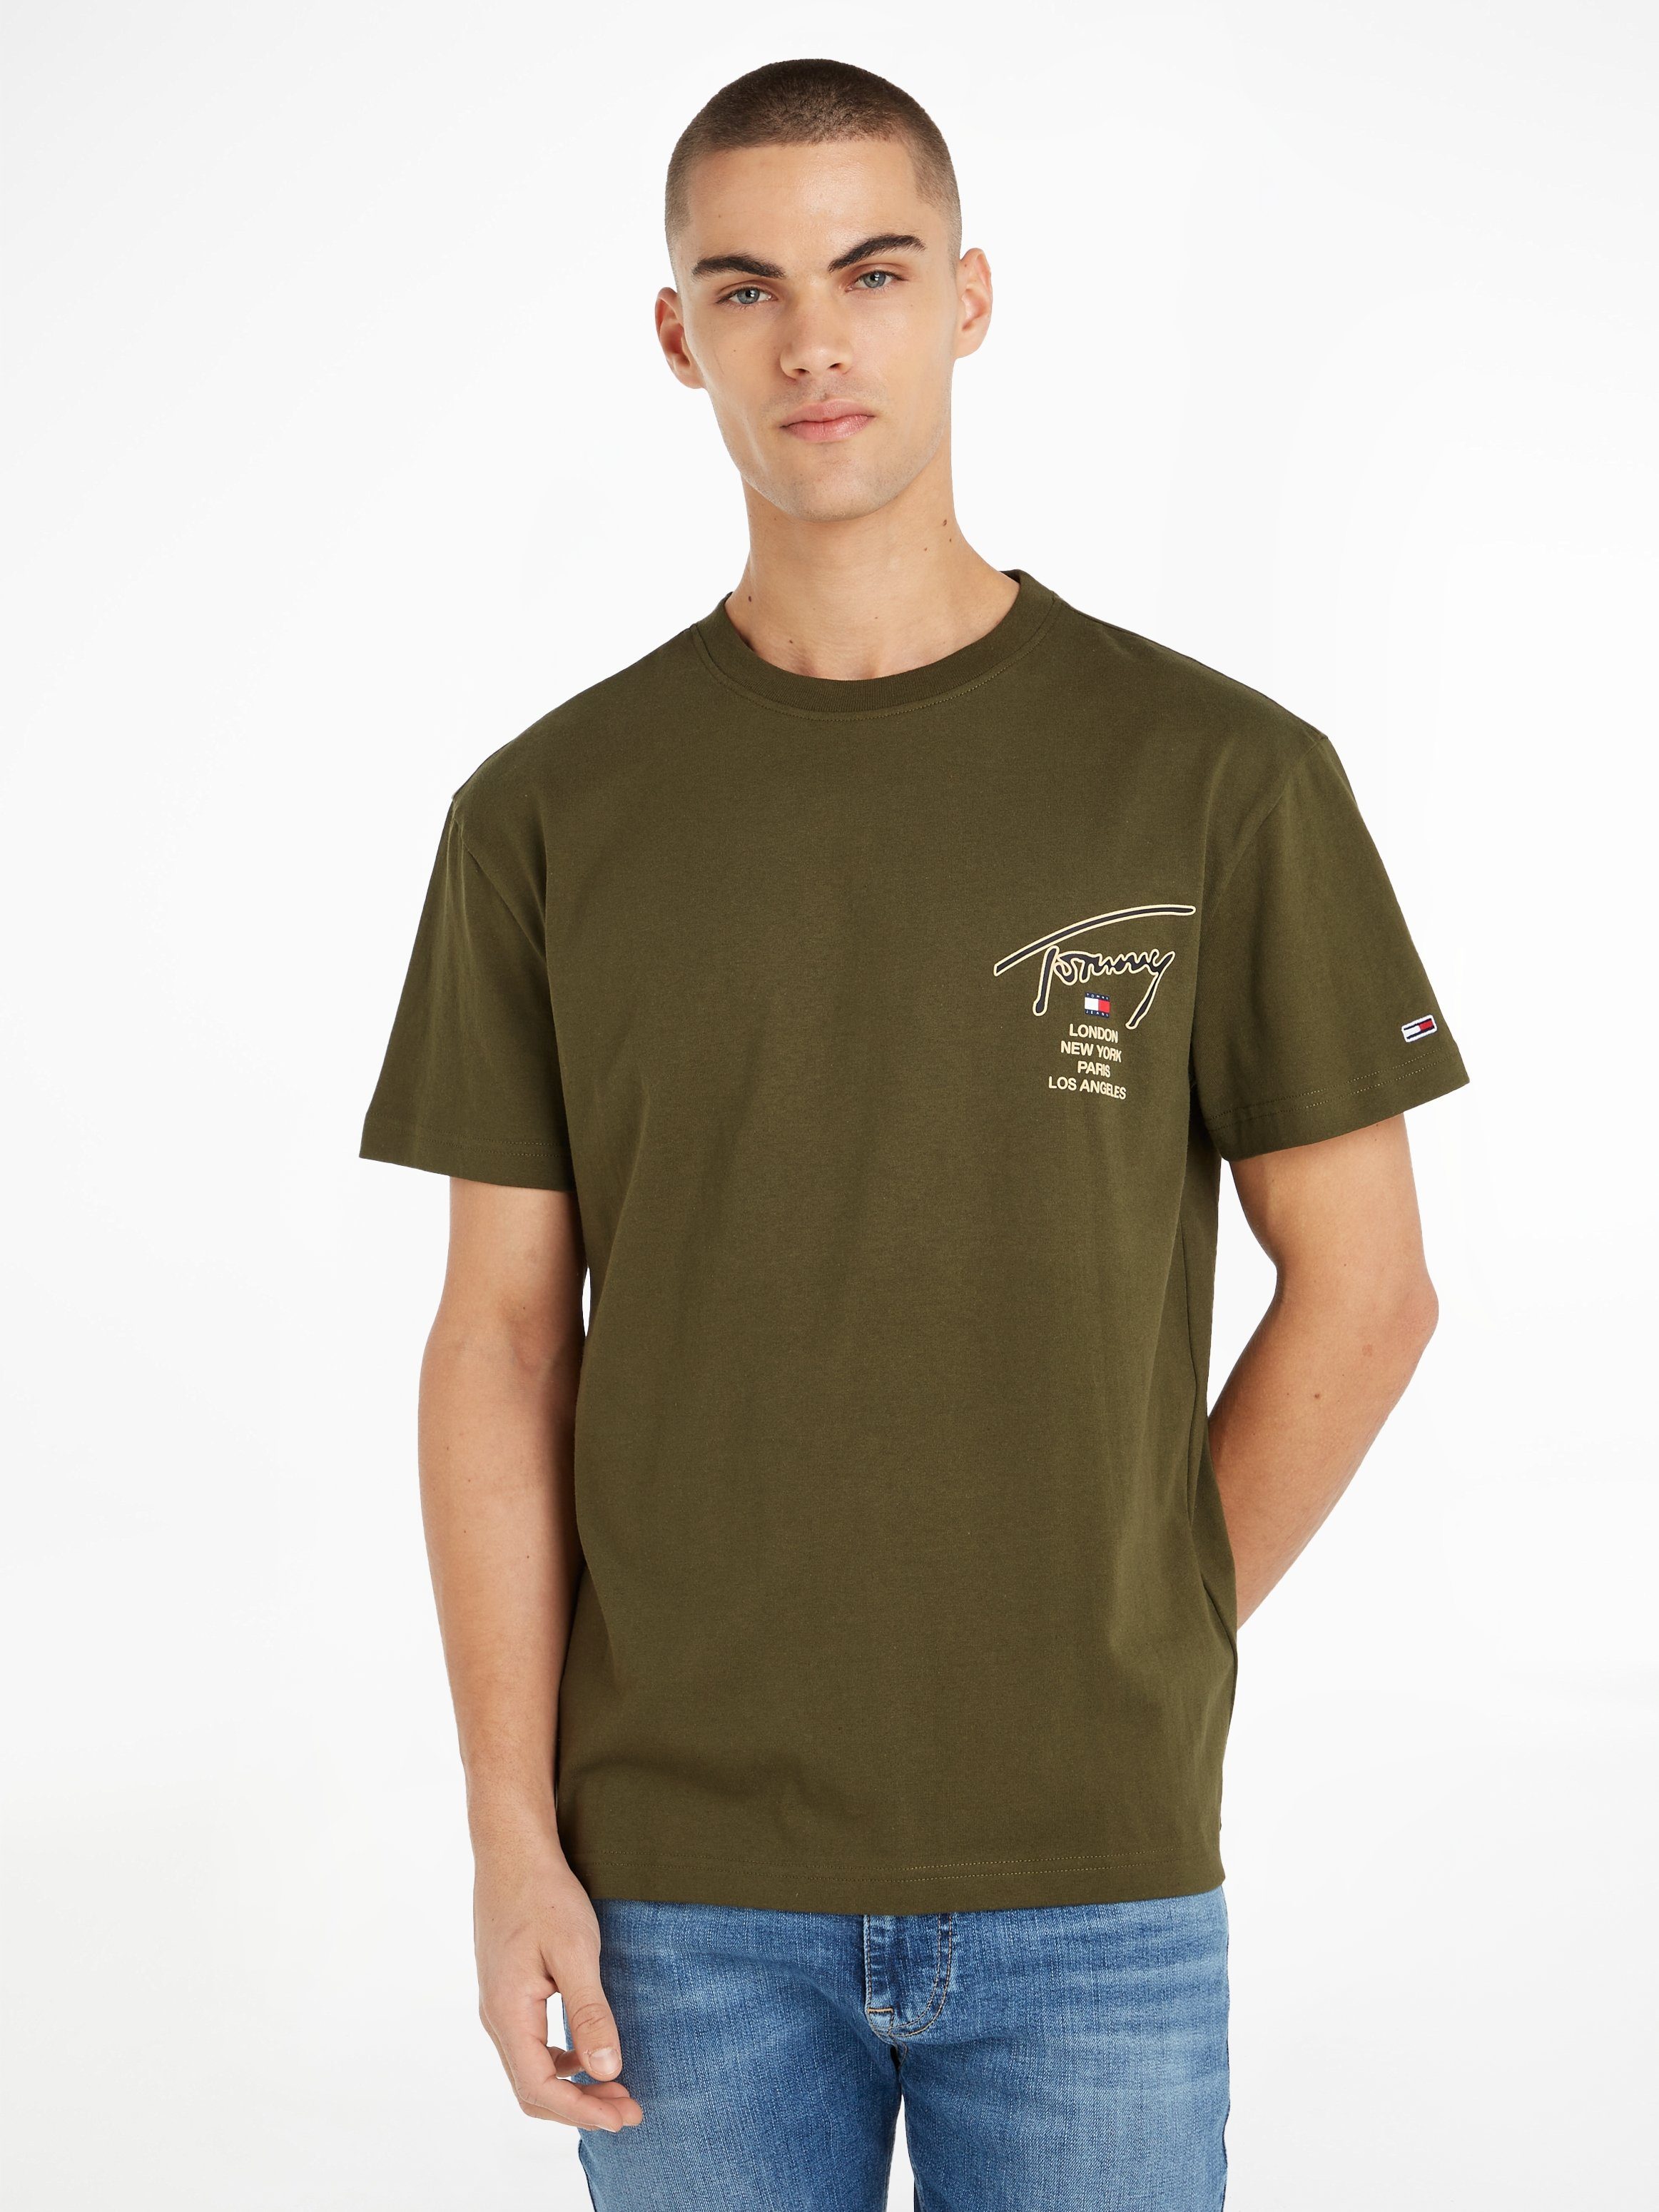 CLSC Green GOLD Tommy BACK SIGNATURE TEE T-Shirt Jeans TJM Olive Drab